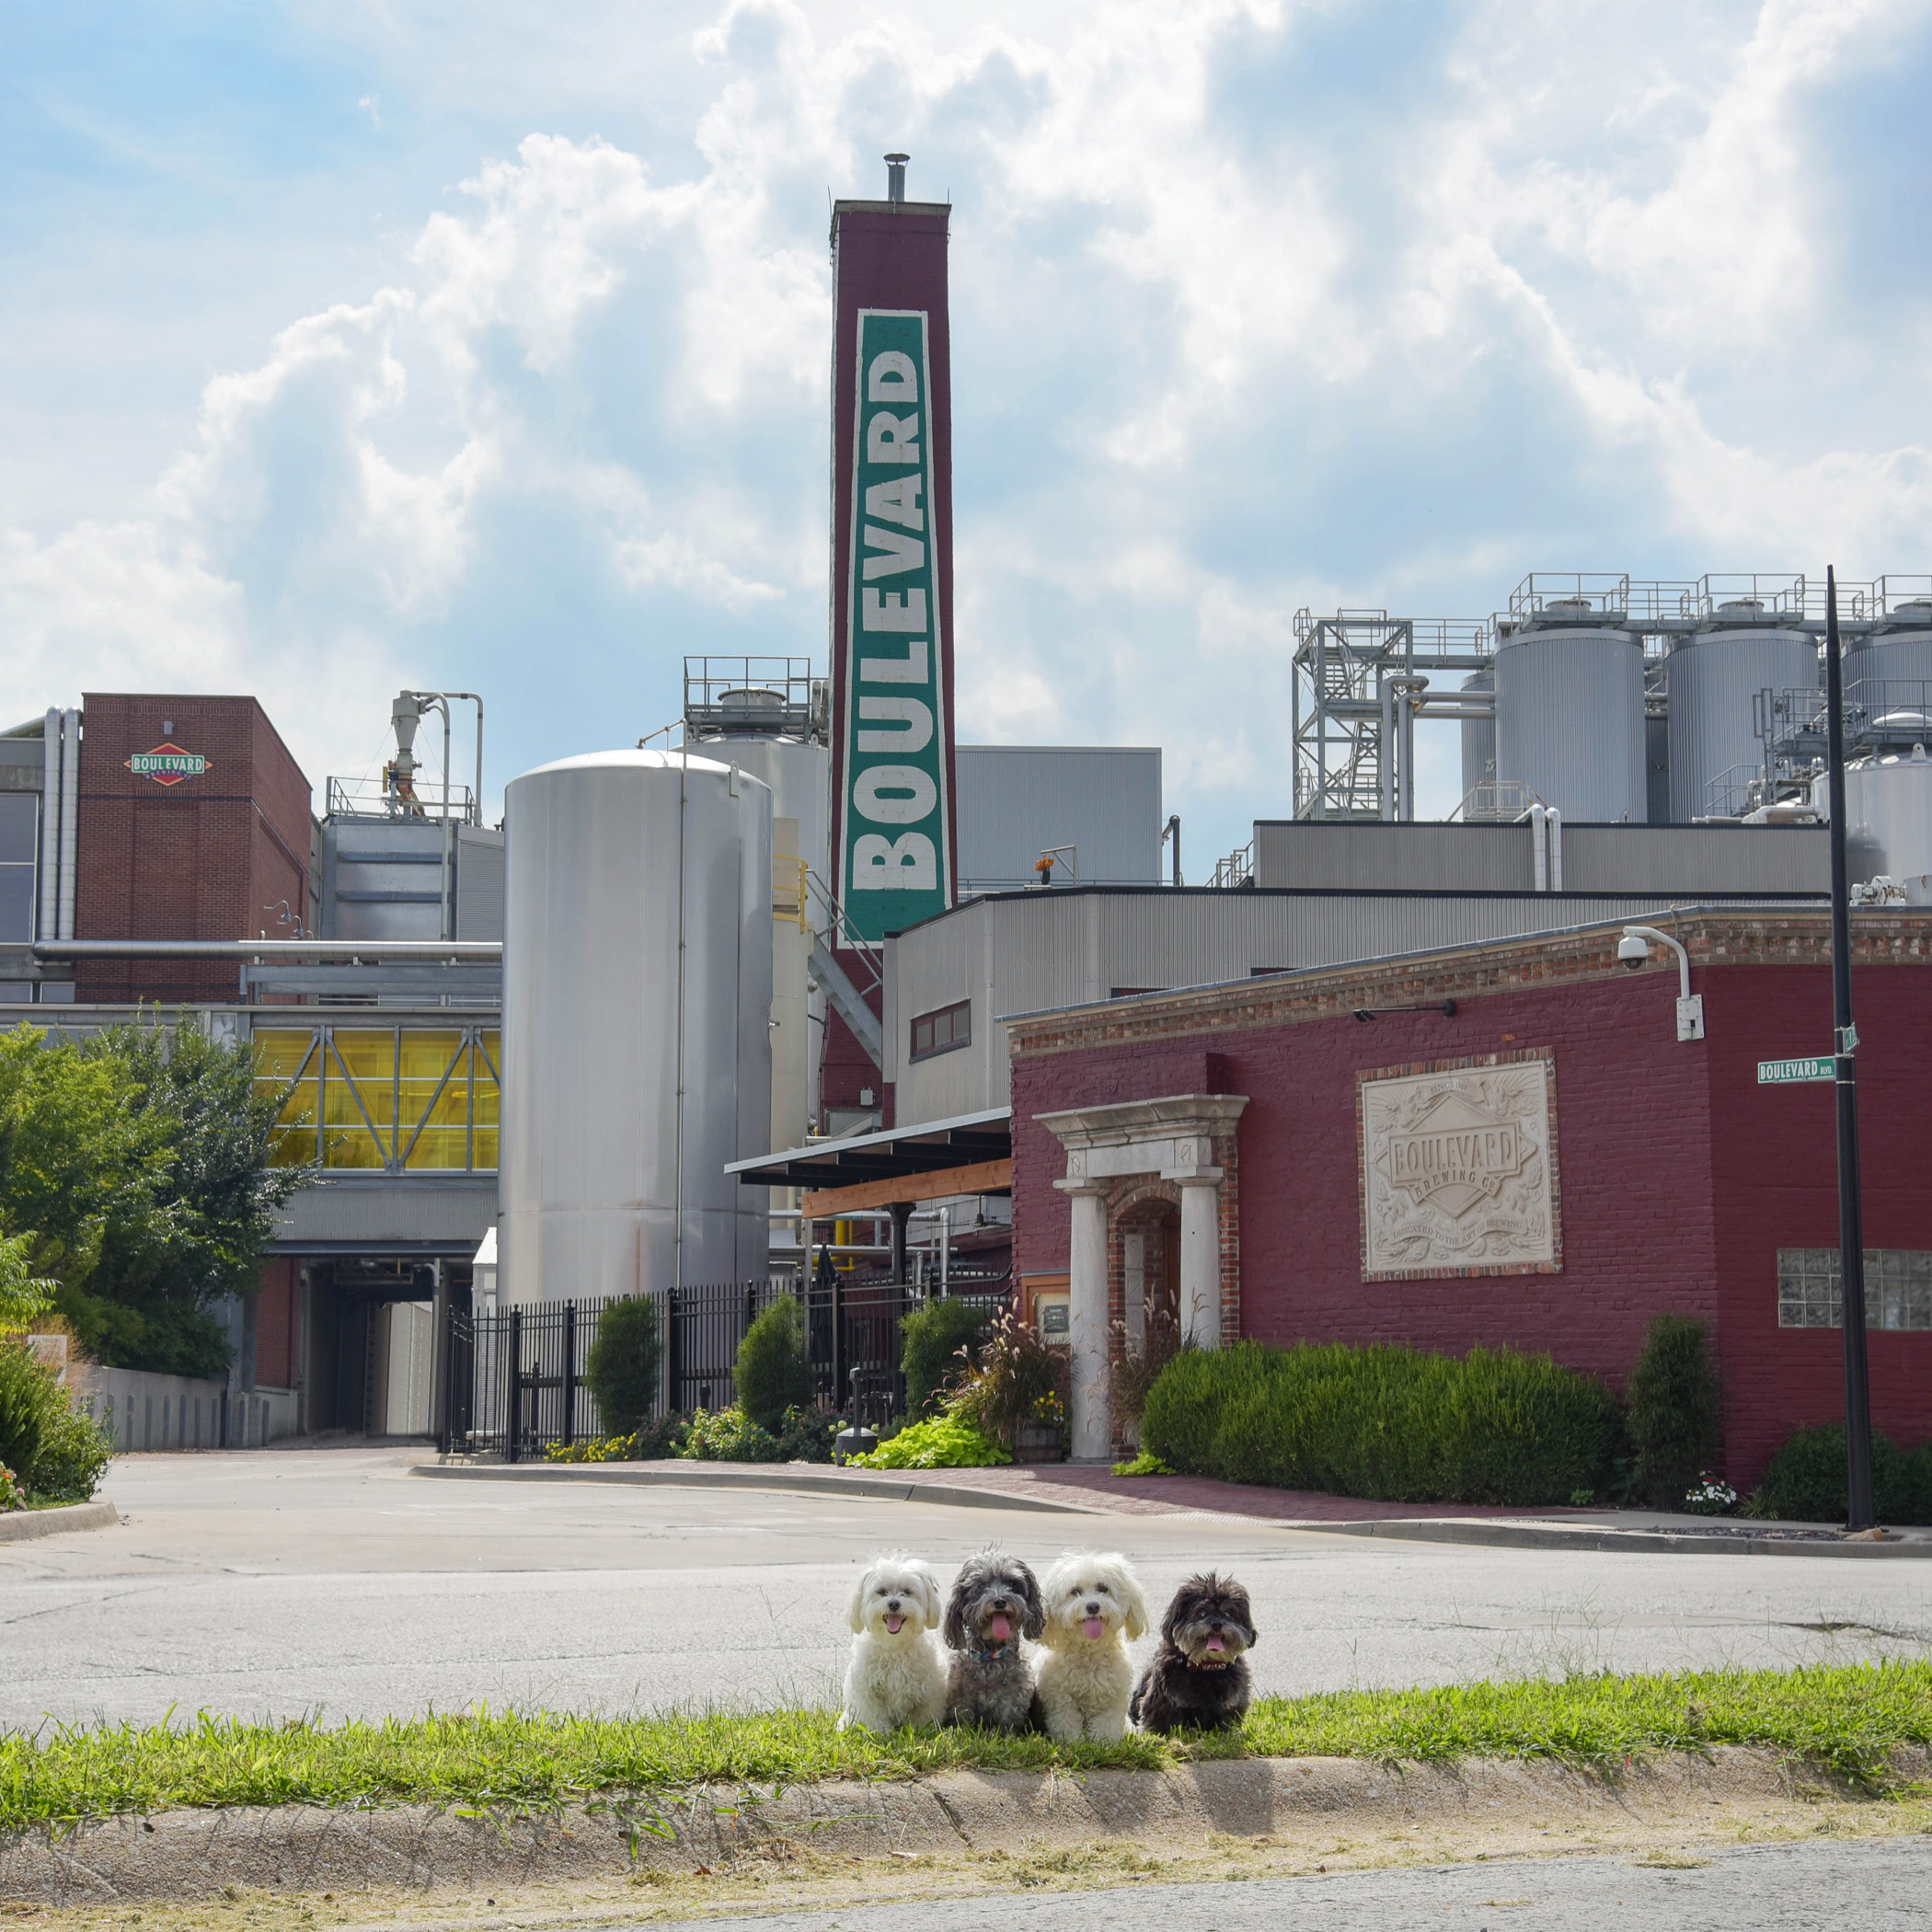  No day out on the town would be complete without a stop at the local brewery! Our favorite is the Unfiltered Wheat. 